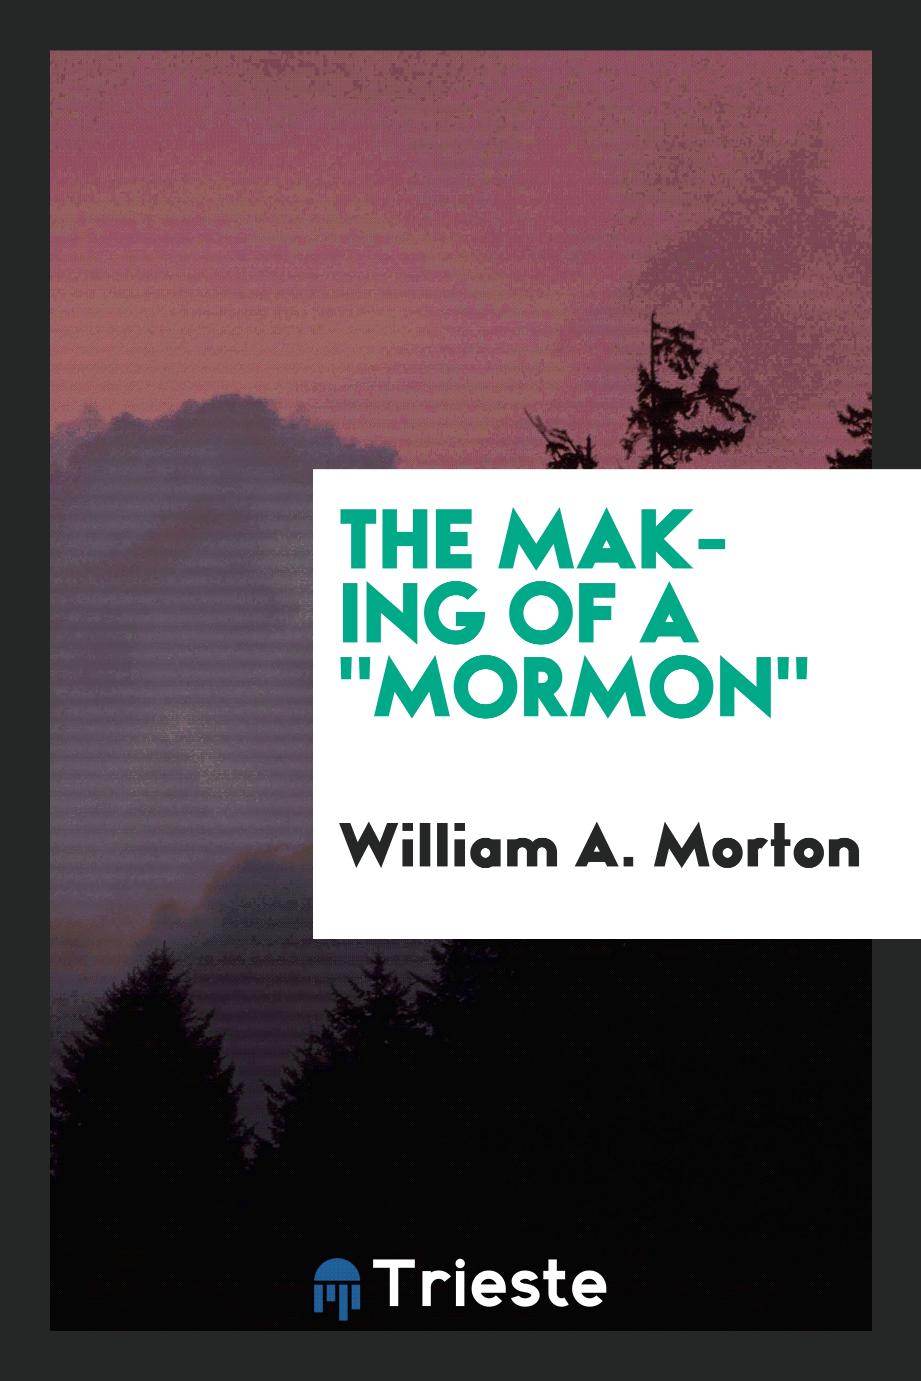 The Making of A "Mormon"